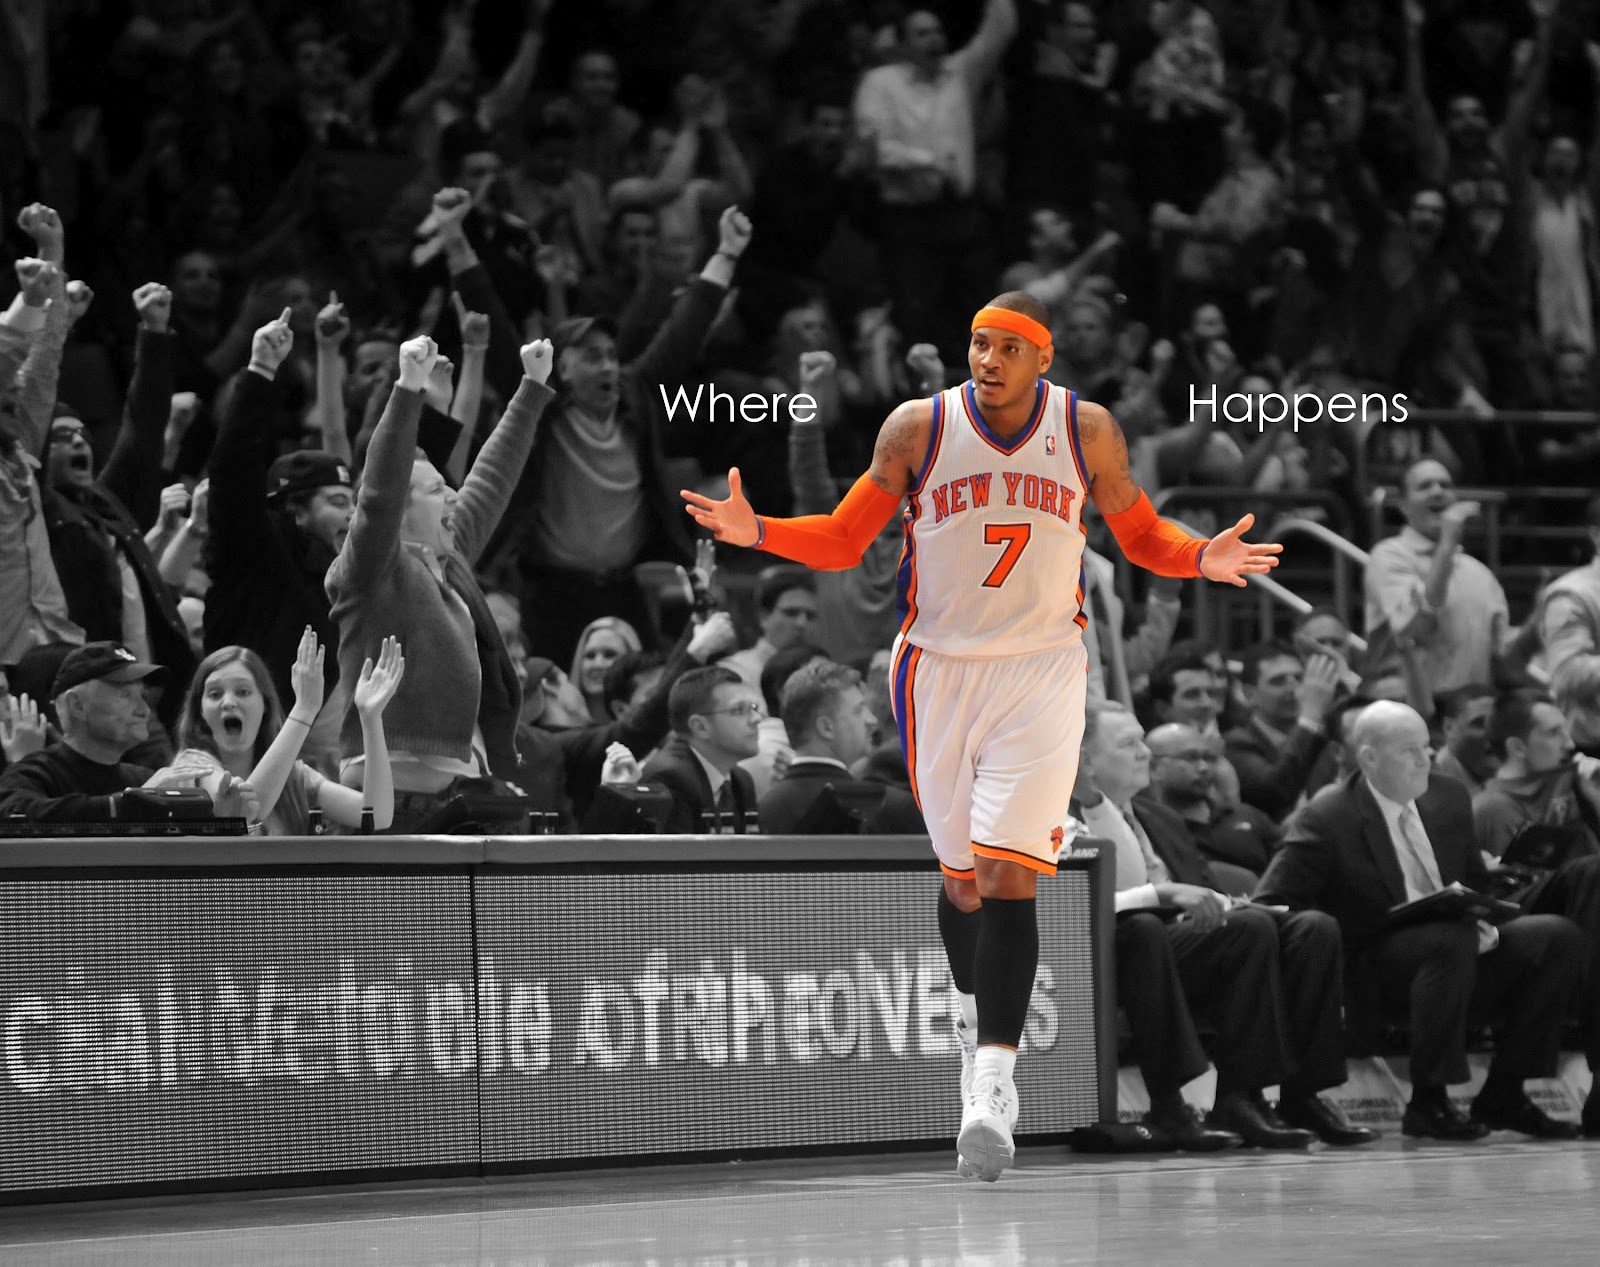 Carmelo Anthony HD wallpapers NBA NBA Wallpapers